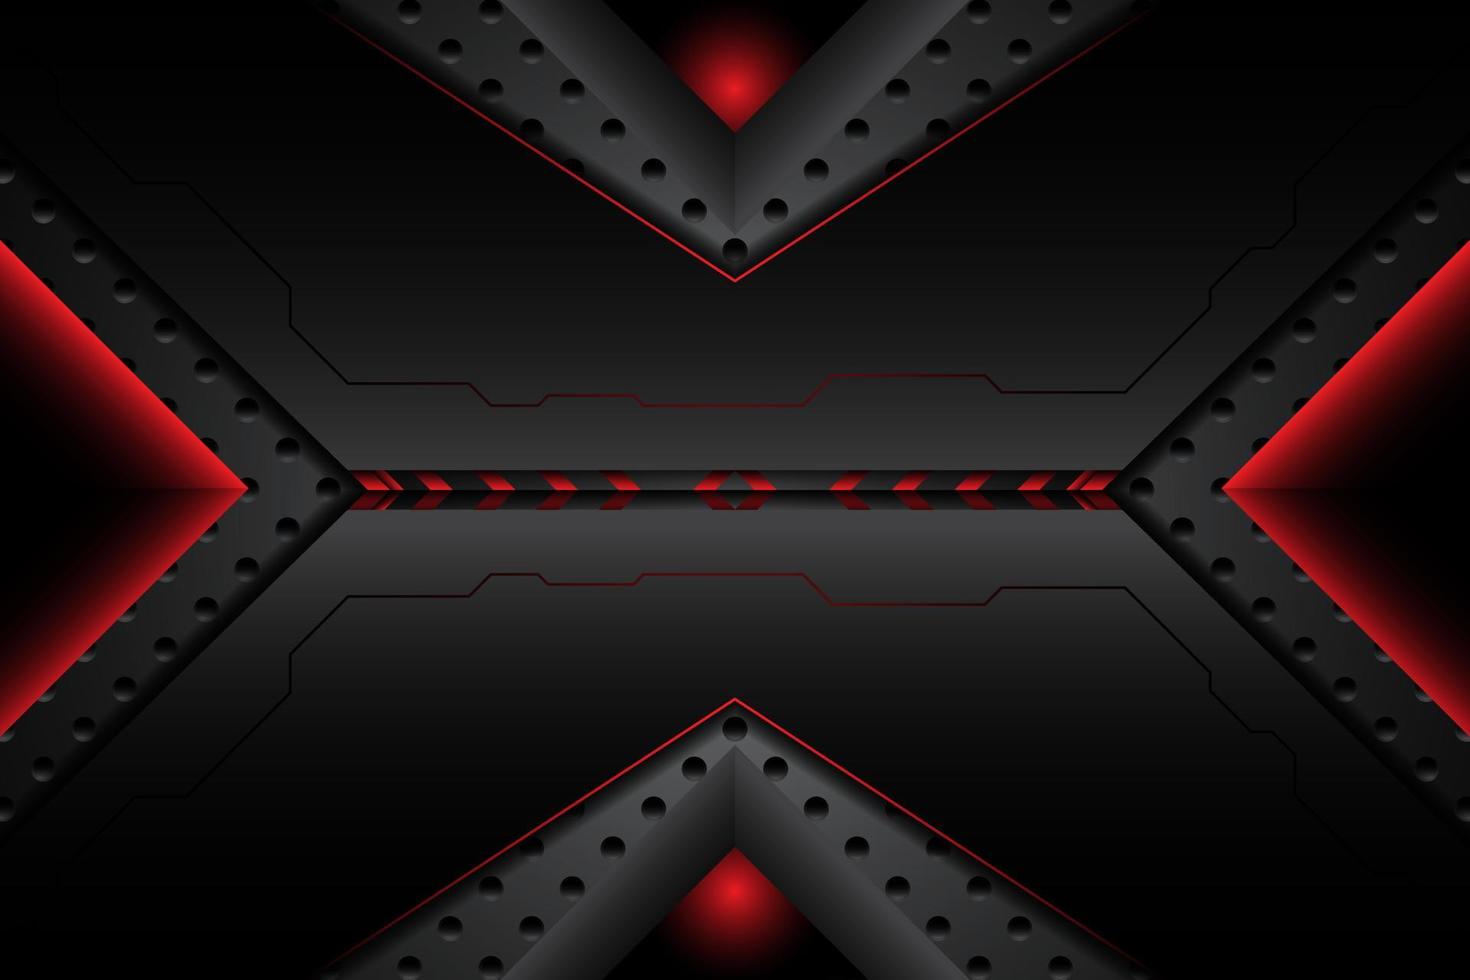 abstract metal carbon texture modern and edge lines red black on steel mesh. design futuristic technology background vector